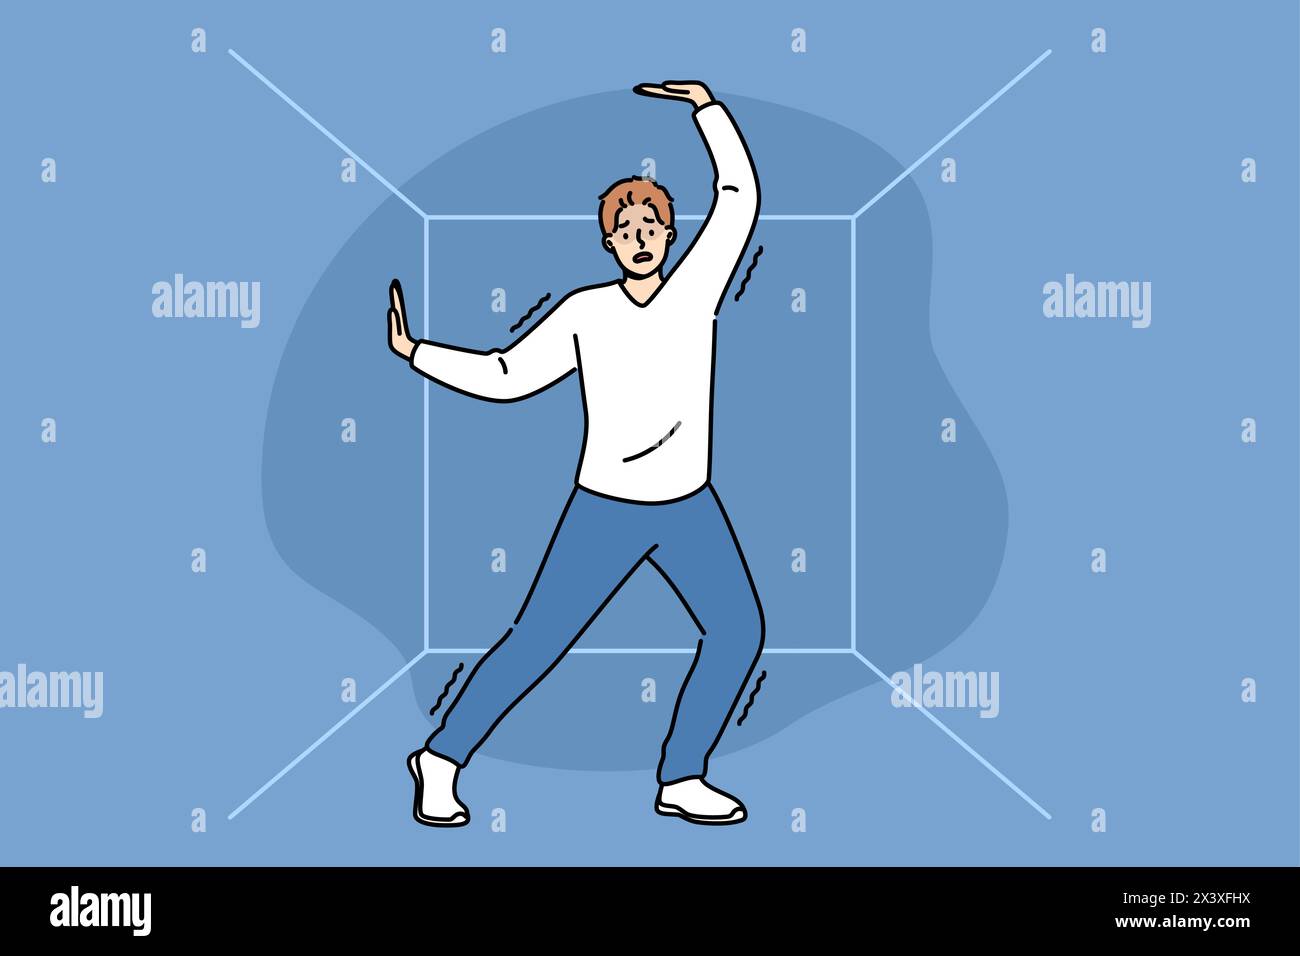 Man suffering from claustrophobia experiences shock when finds himself in confined space and needs quick release to freedom. Problem of claustrophobia due to psychological trauma received in childhood Stock Vector